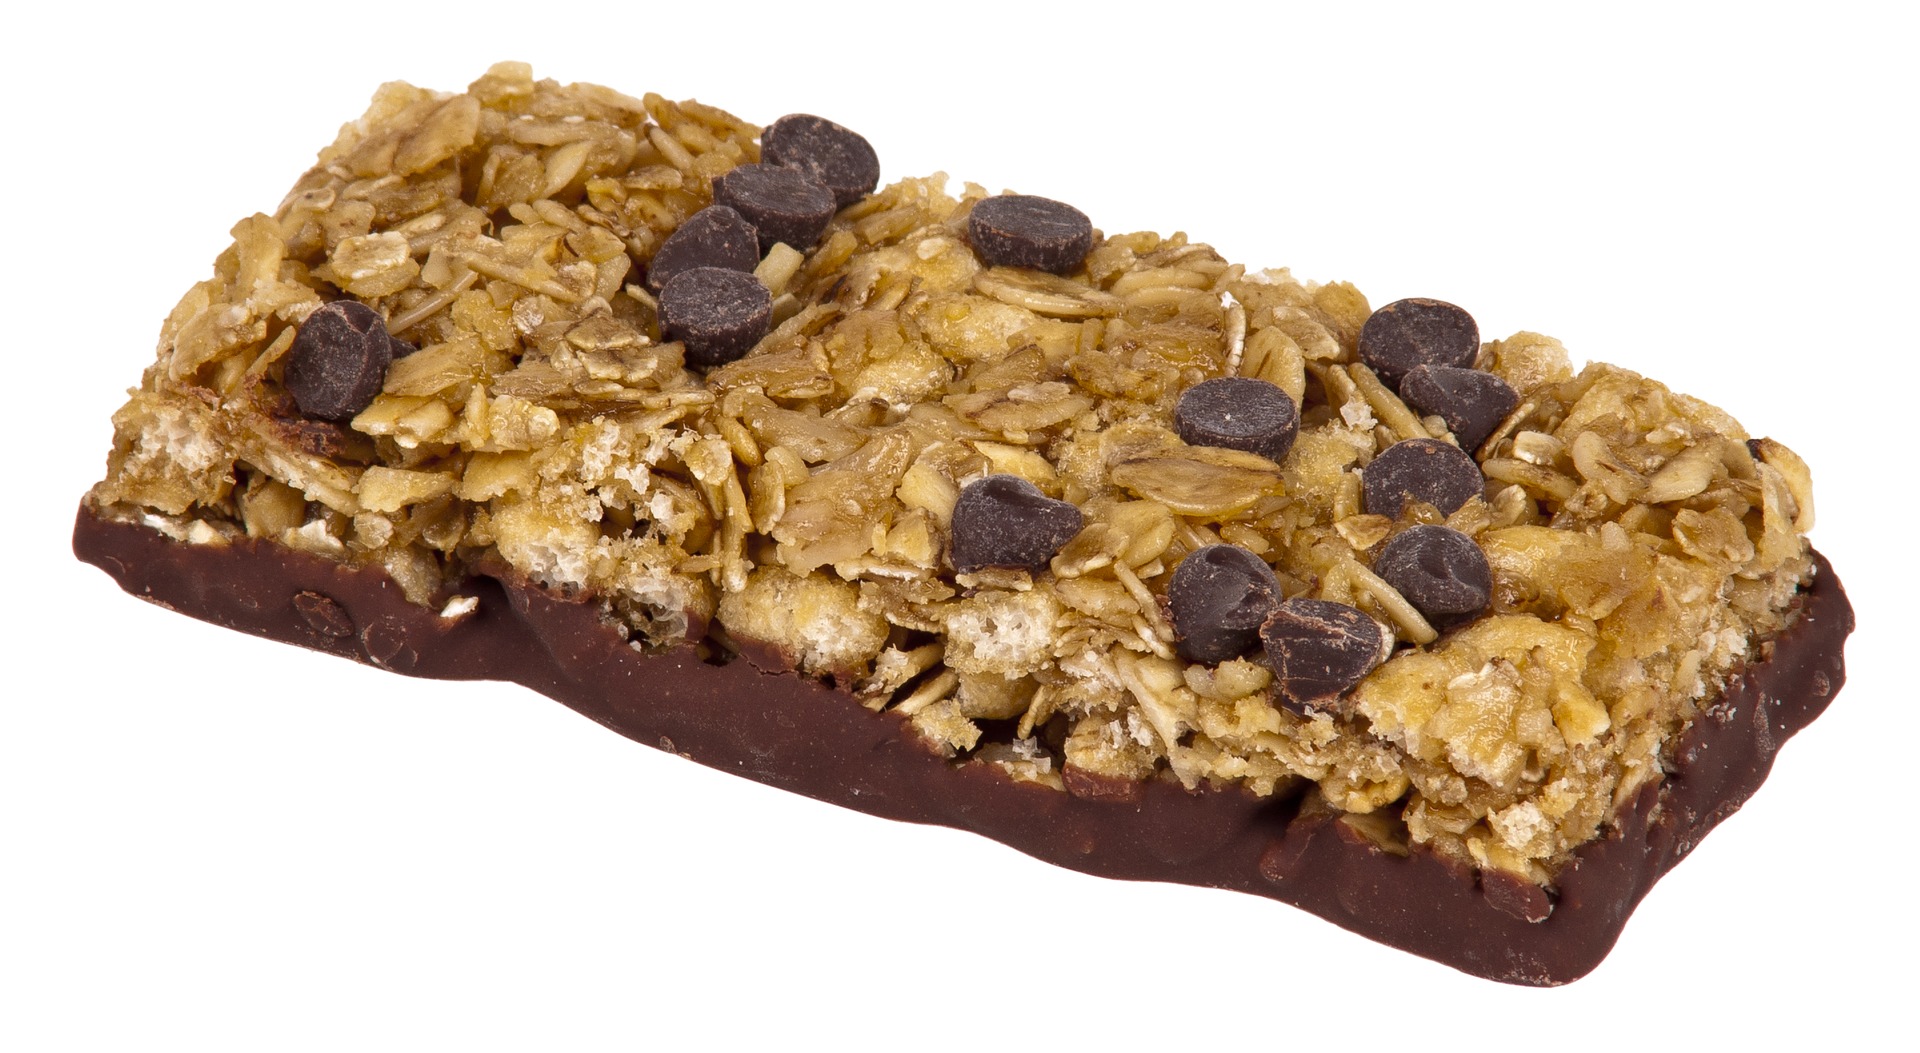 A granola bar dipped in chocolate on the bottom and chocolate chips throughout